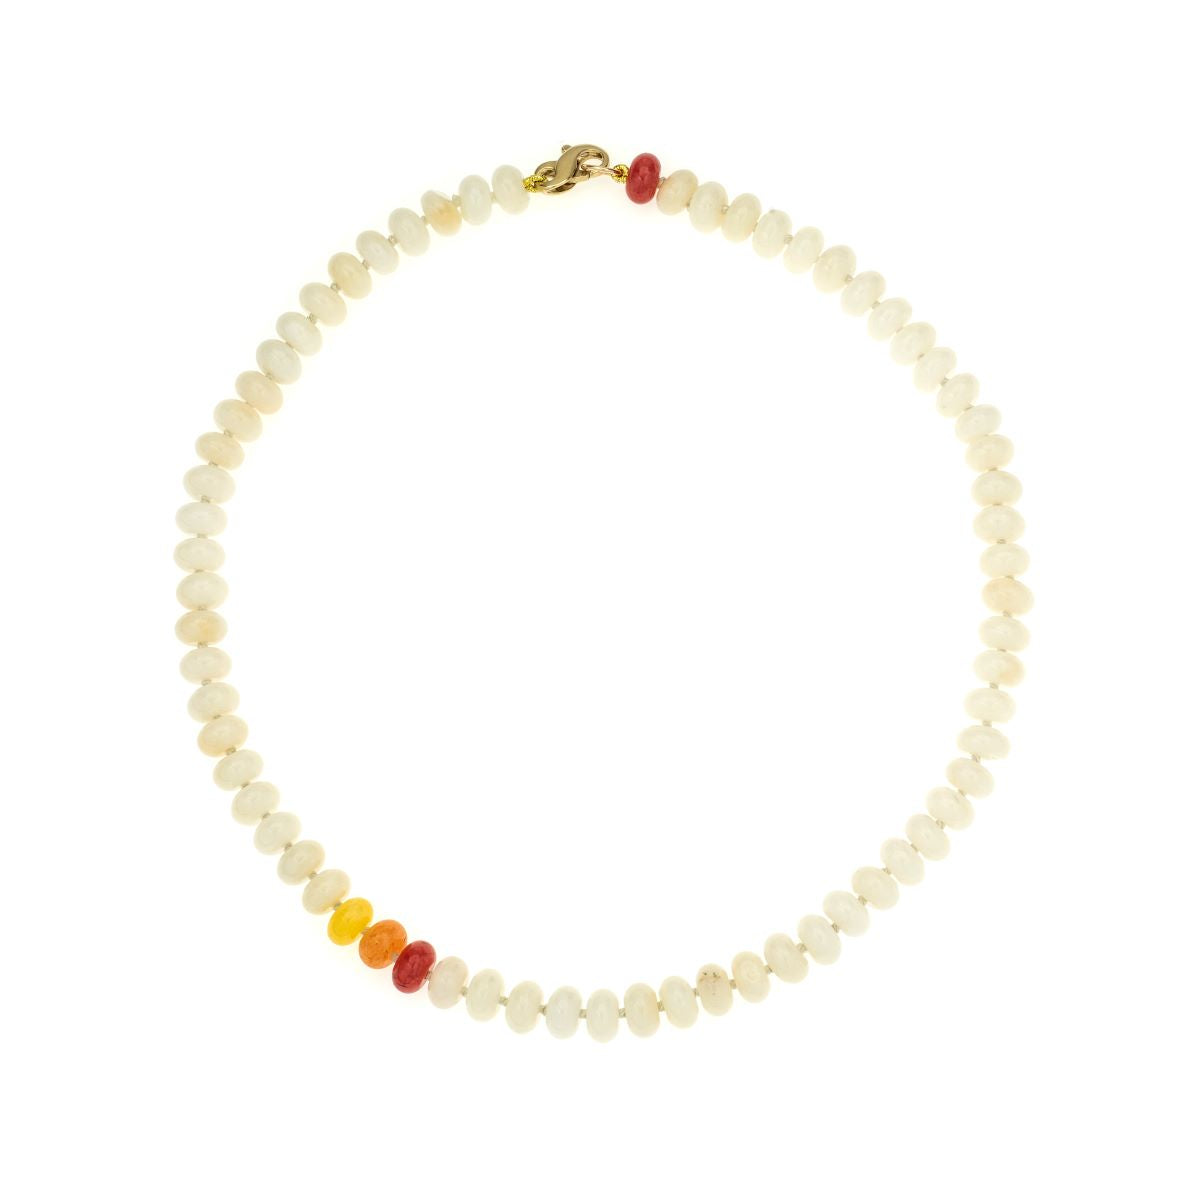 Ivory Jade and Red Gemstone Necklace